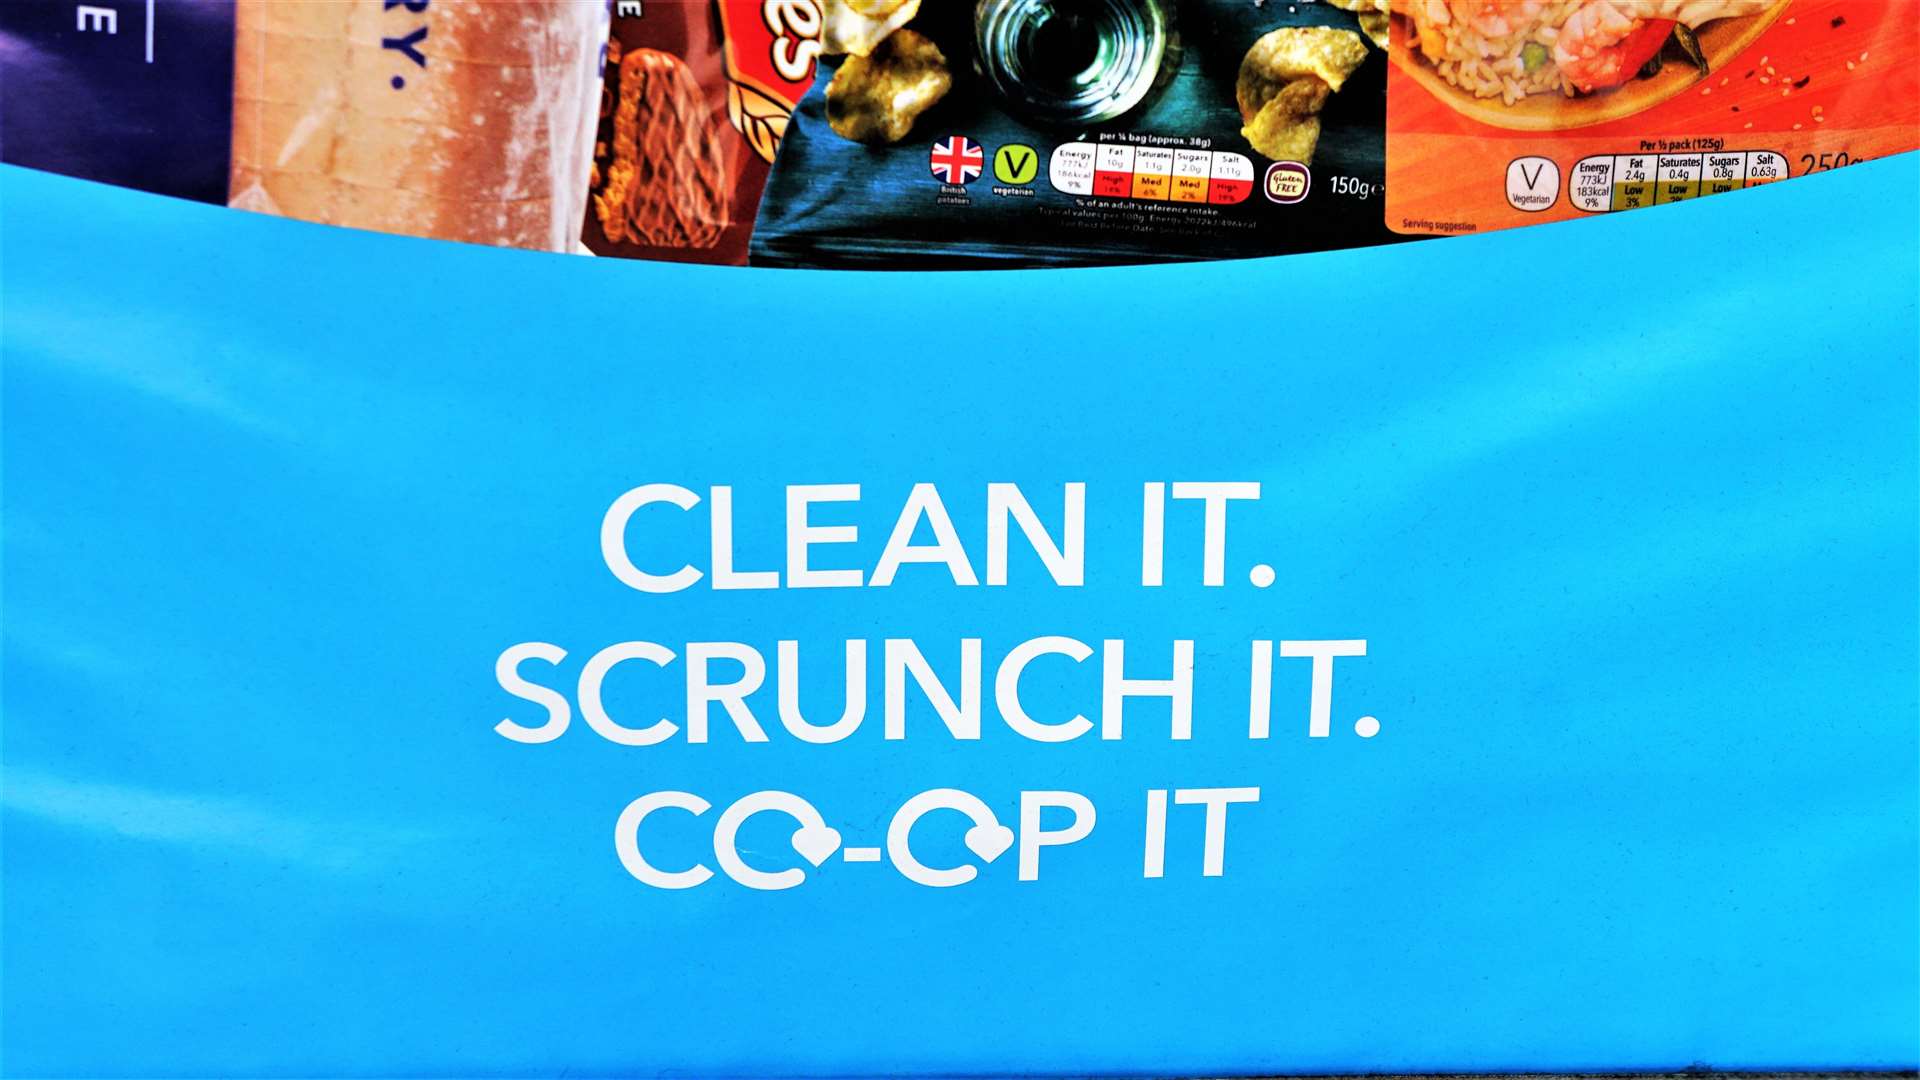 A new campaign placard urging shoppers to recycle at the store.